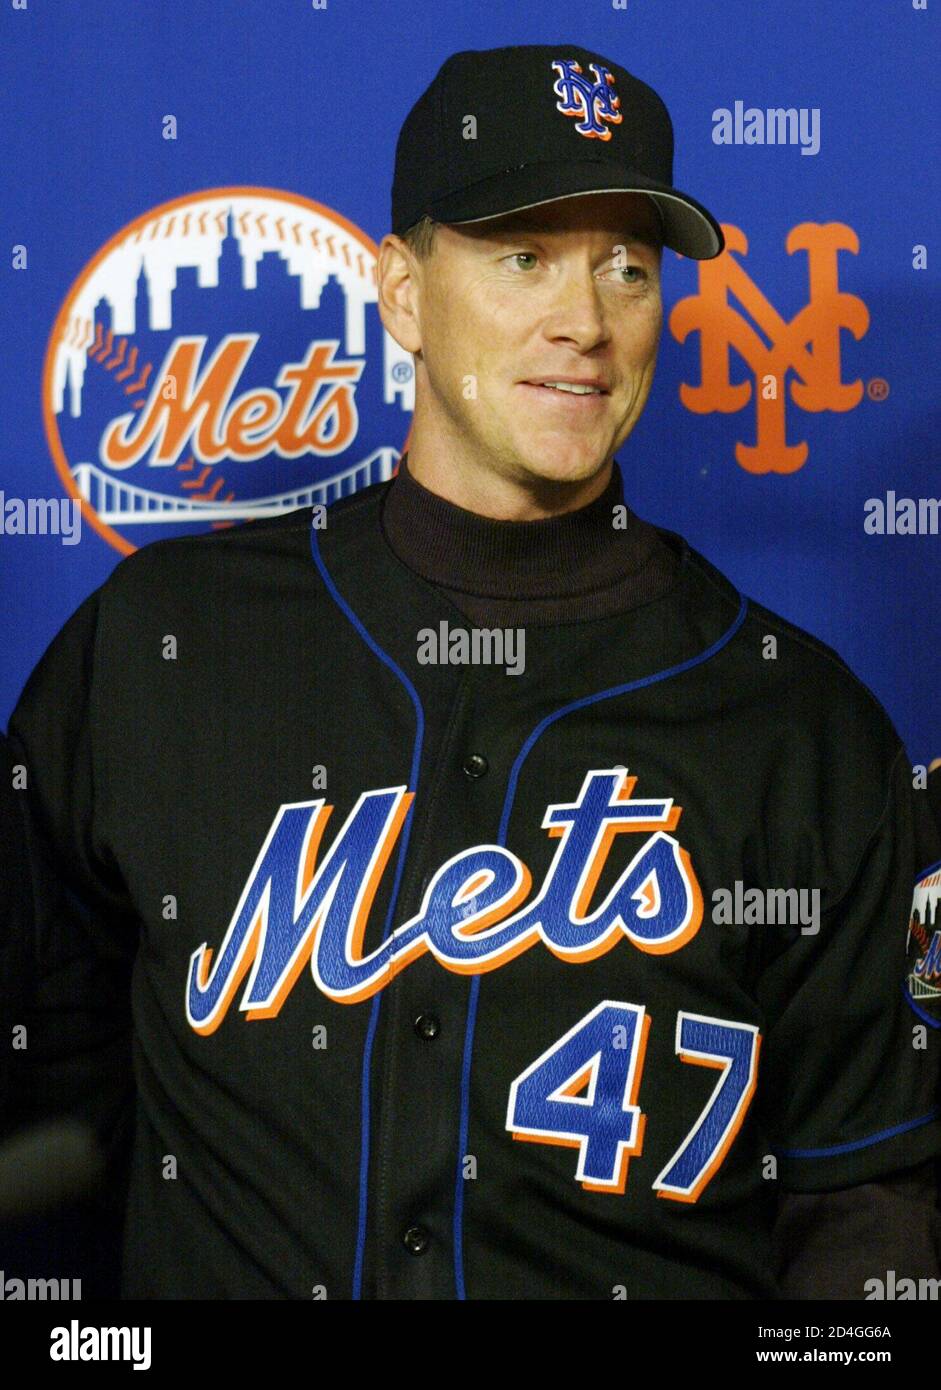 Newly acquired left handed starting pitcher for the New York Mets Tom  Glavine smiles as he wears his Mets hat and jersey for the first time at a  news conference to fomally